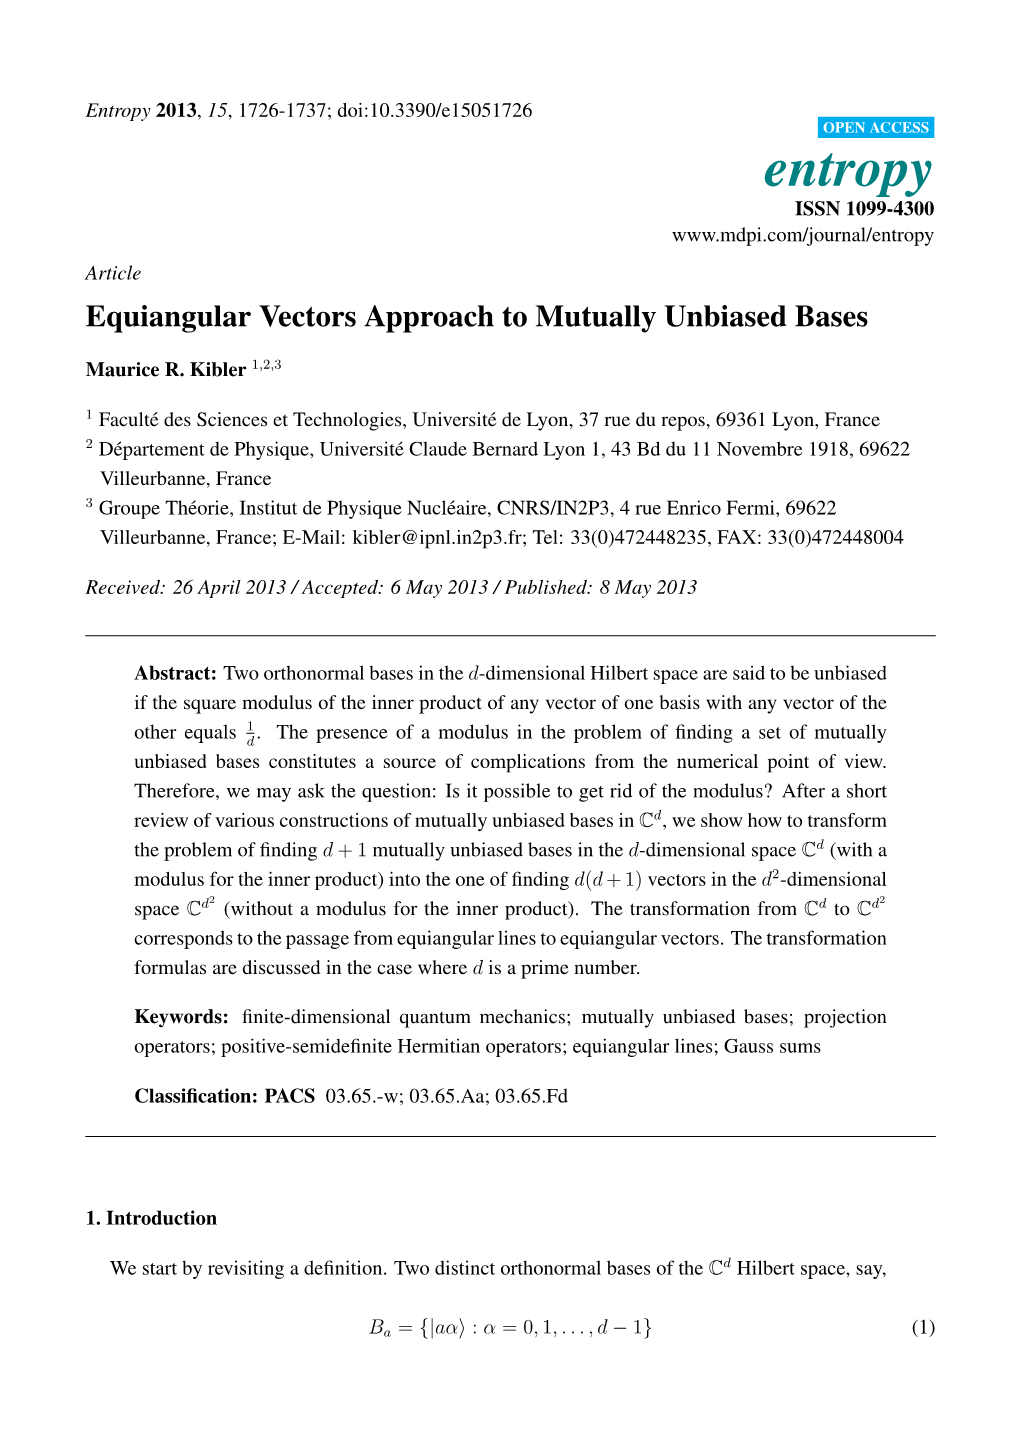 Equiangular Vectors Approach to Mutually Unbiased Bases